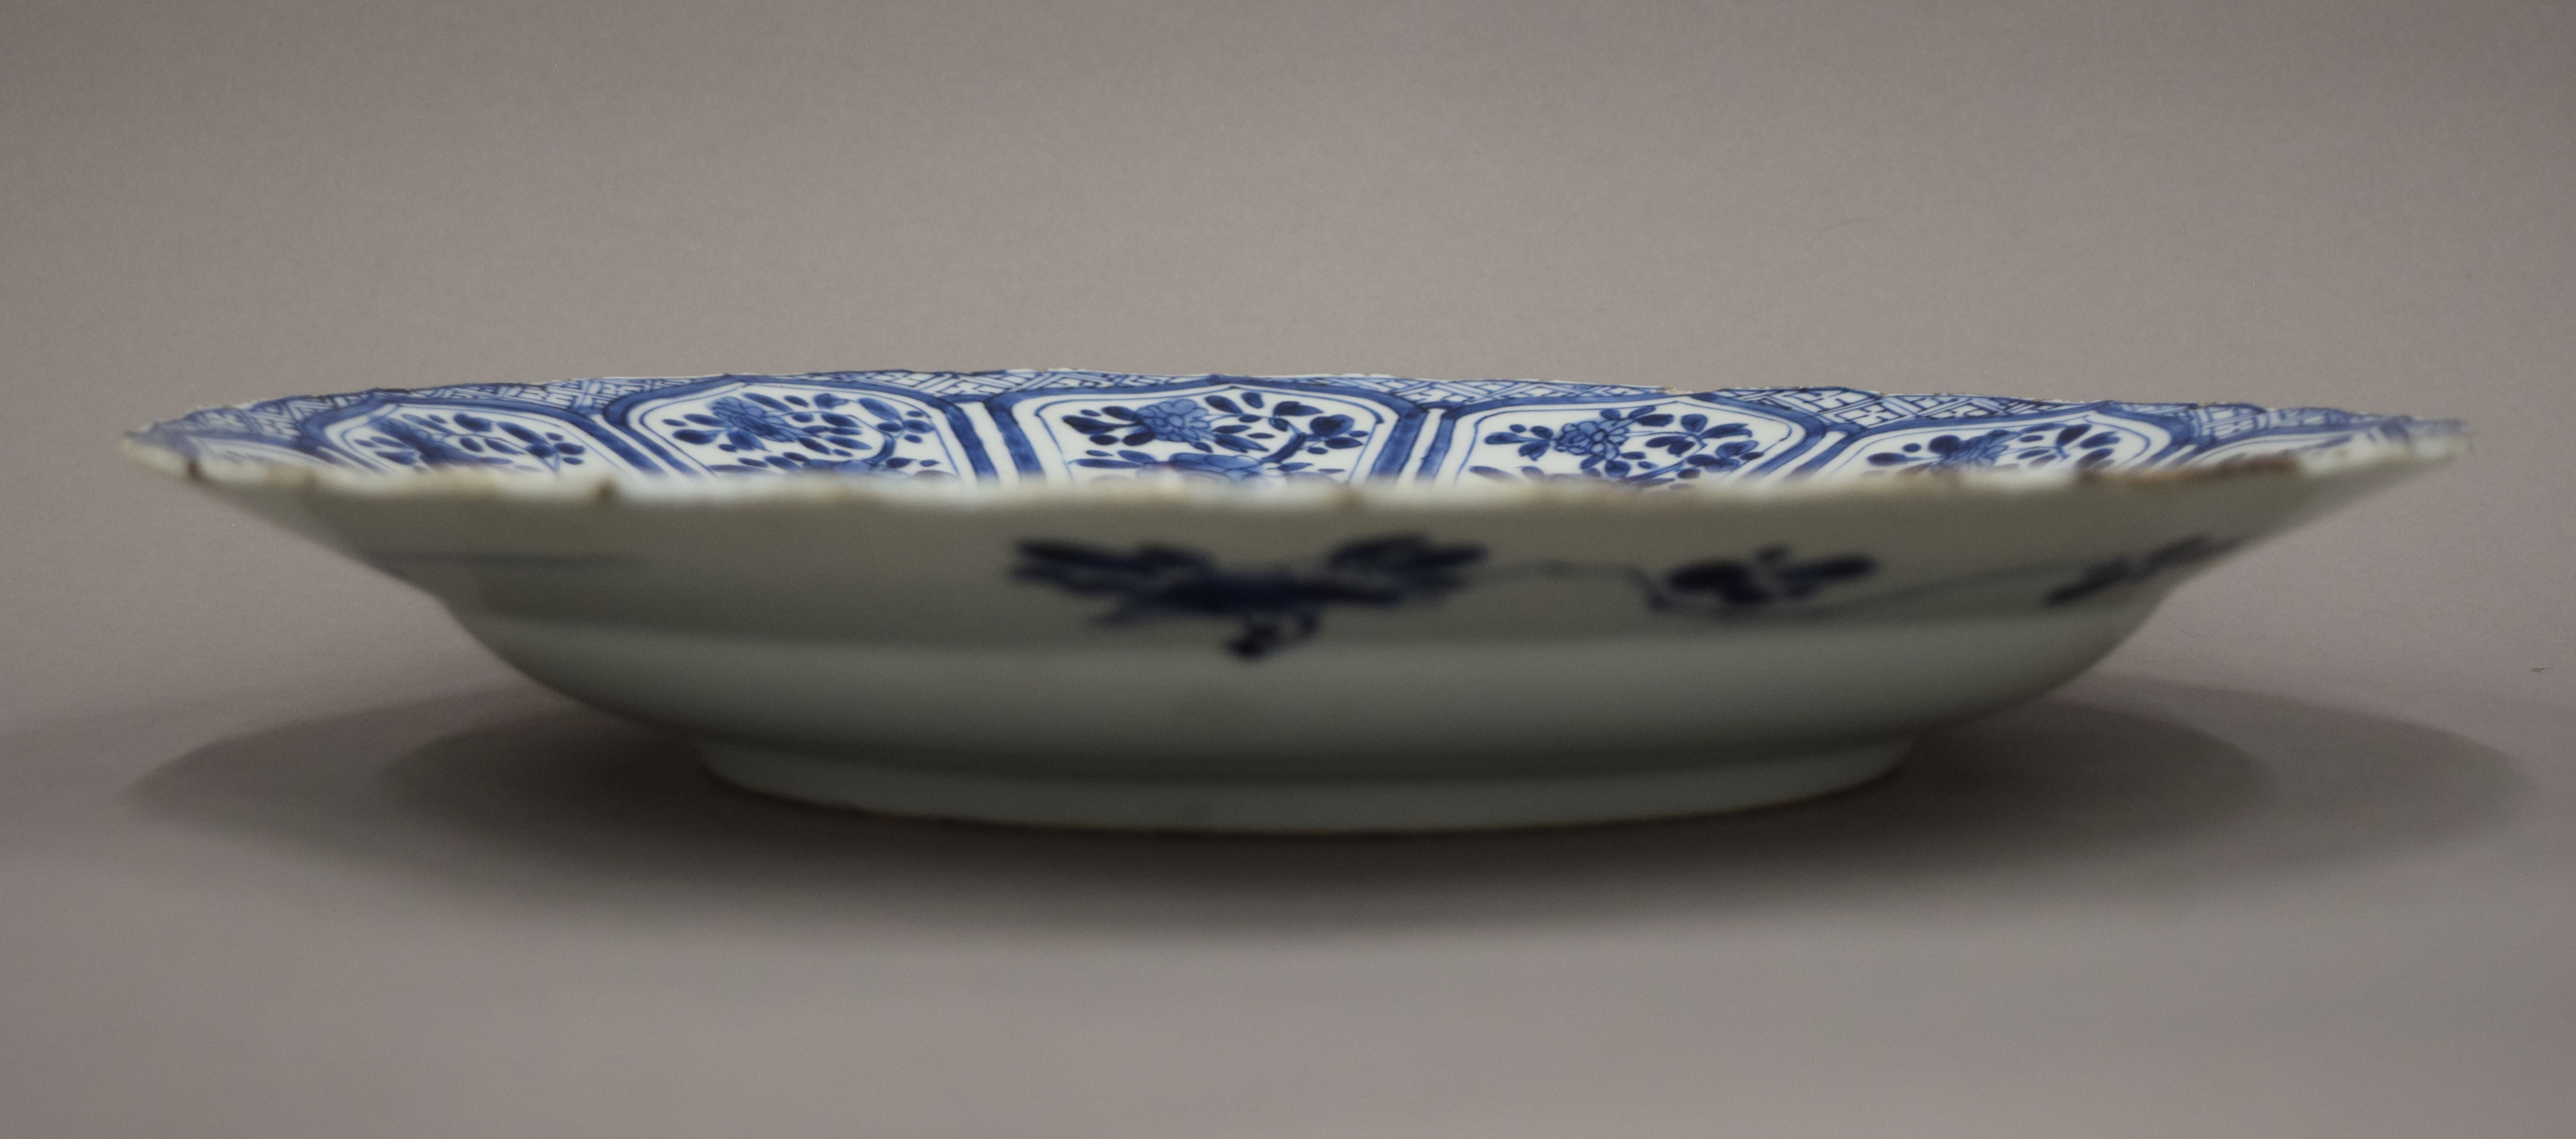 A 19th century Chinese blue and white porcelain plate. 35 cm diameter. - Image 2 of 7